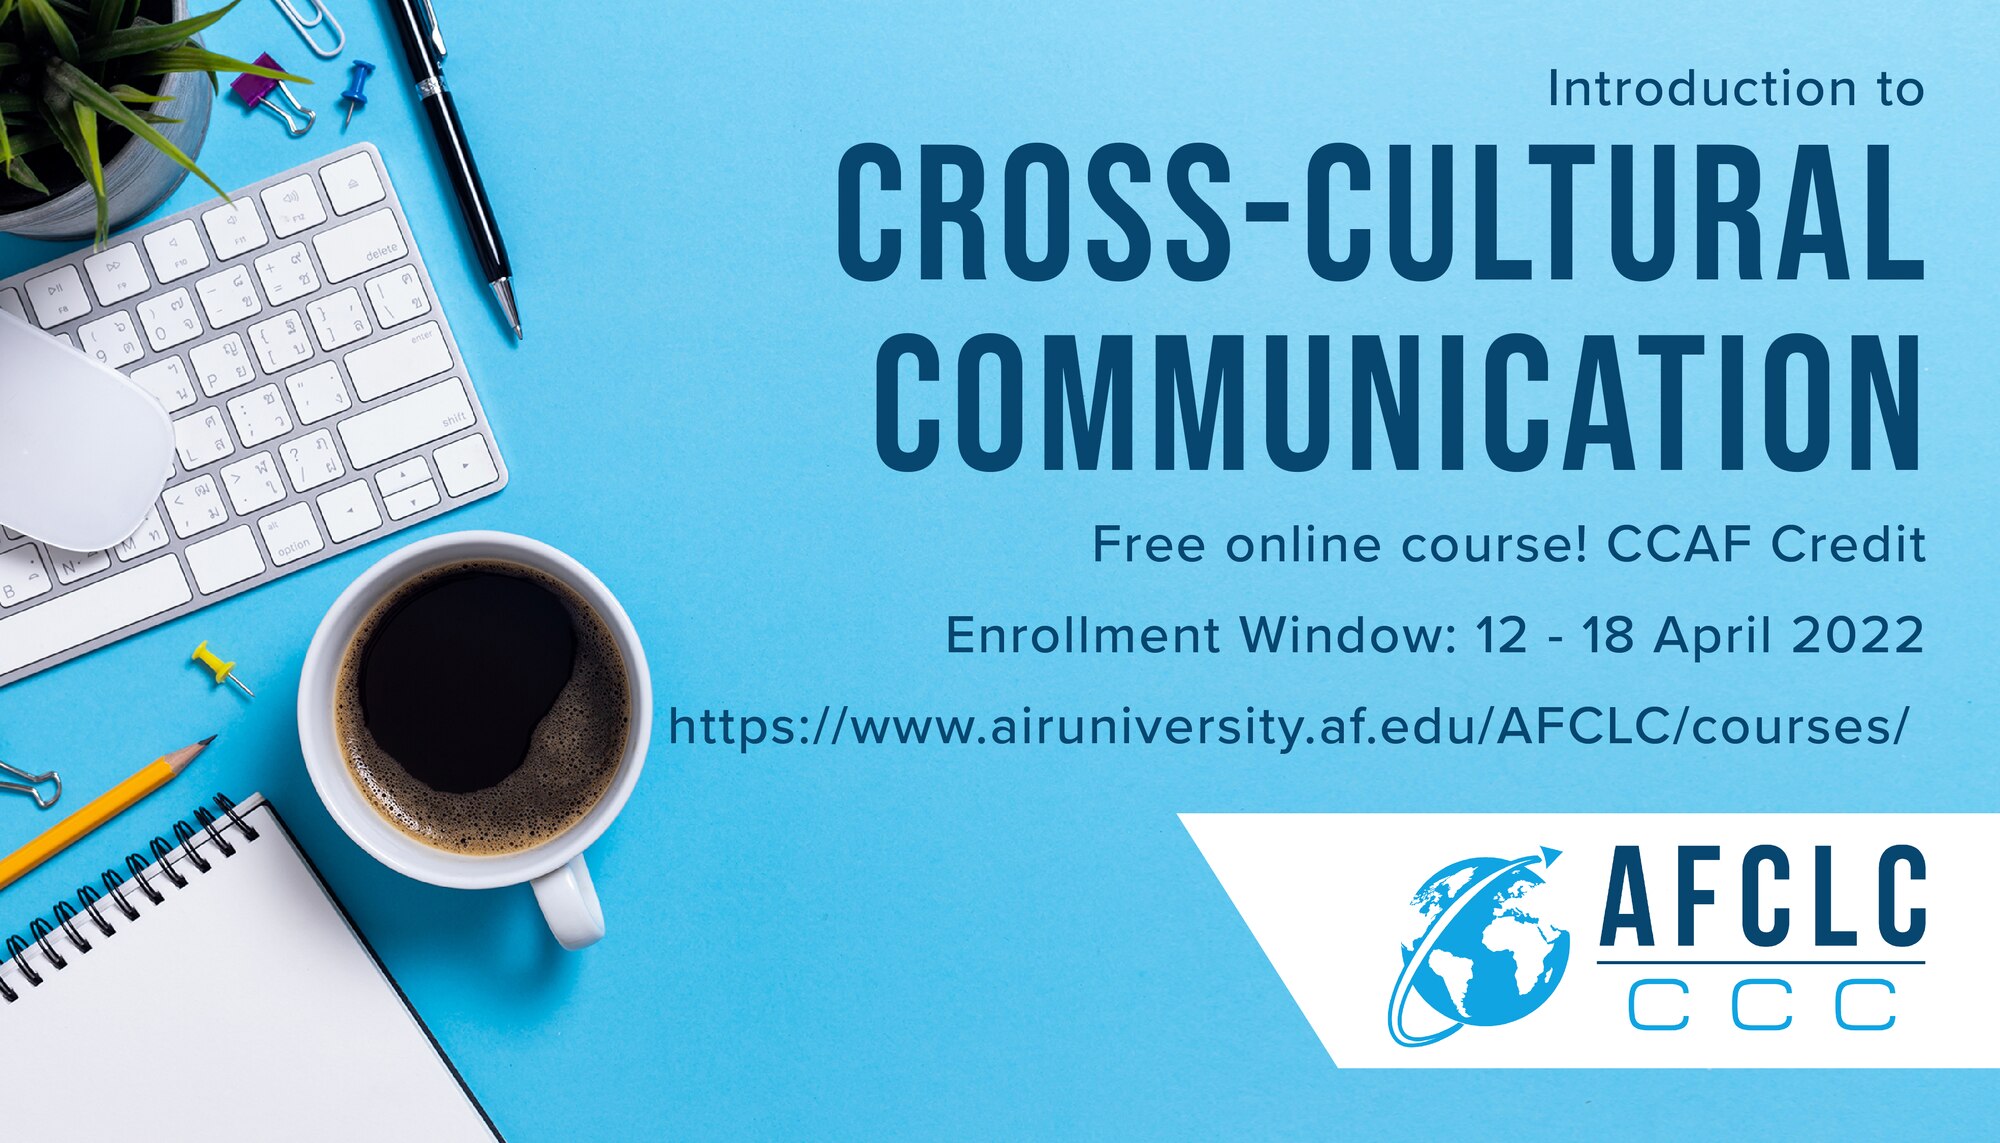 CLTR202, Introduction to Cross-Cultural Communication, is offered to enlisted members of the U.S. Armed Forces participating in the Community College of the Air Force program. It fulfills three semester hours of Institutional (Resident) and/or Program Elective credit requirements of the CCAF Associate of Applied Science degree.